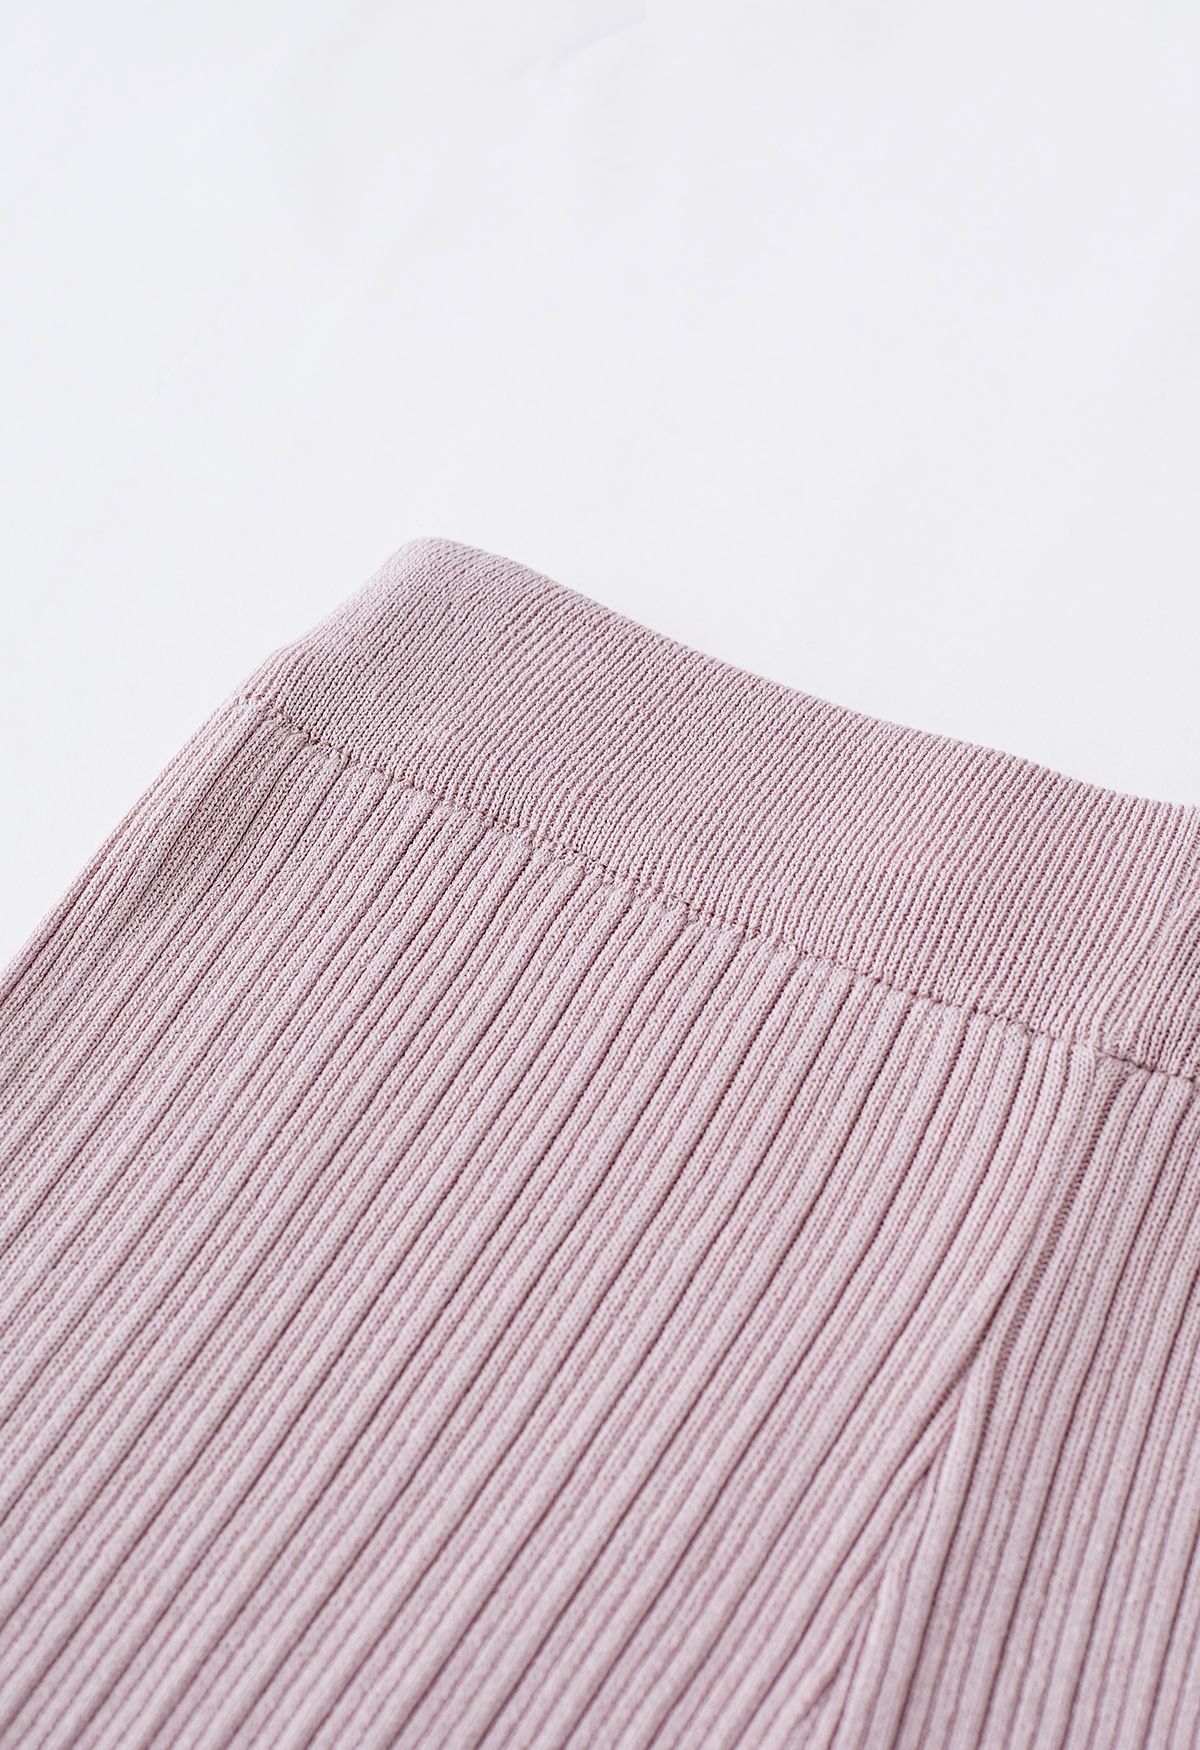 Drawstring Sleeve Knit Top and Pants Set in Dusty Pink